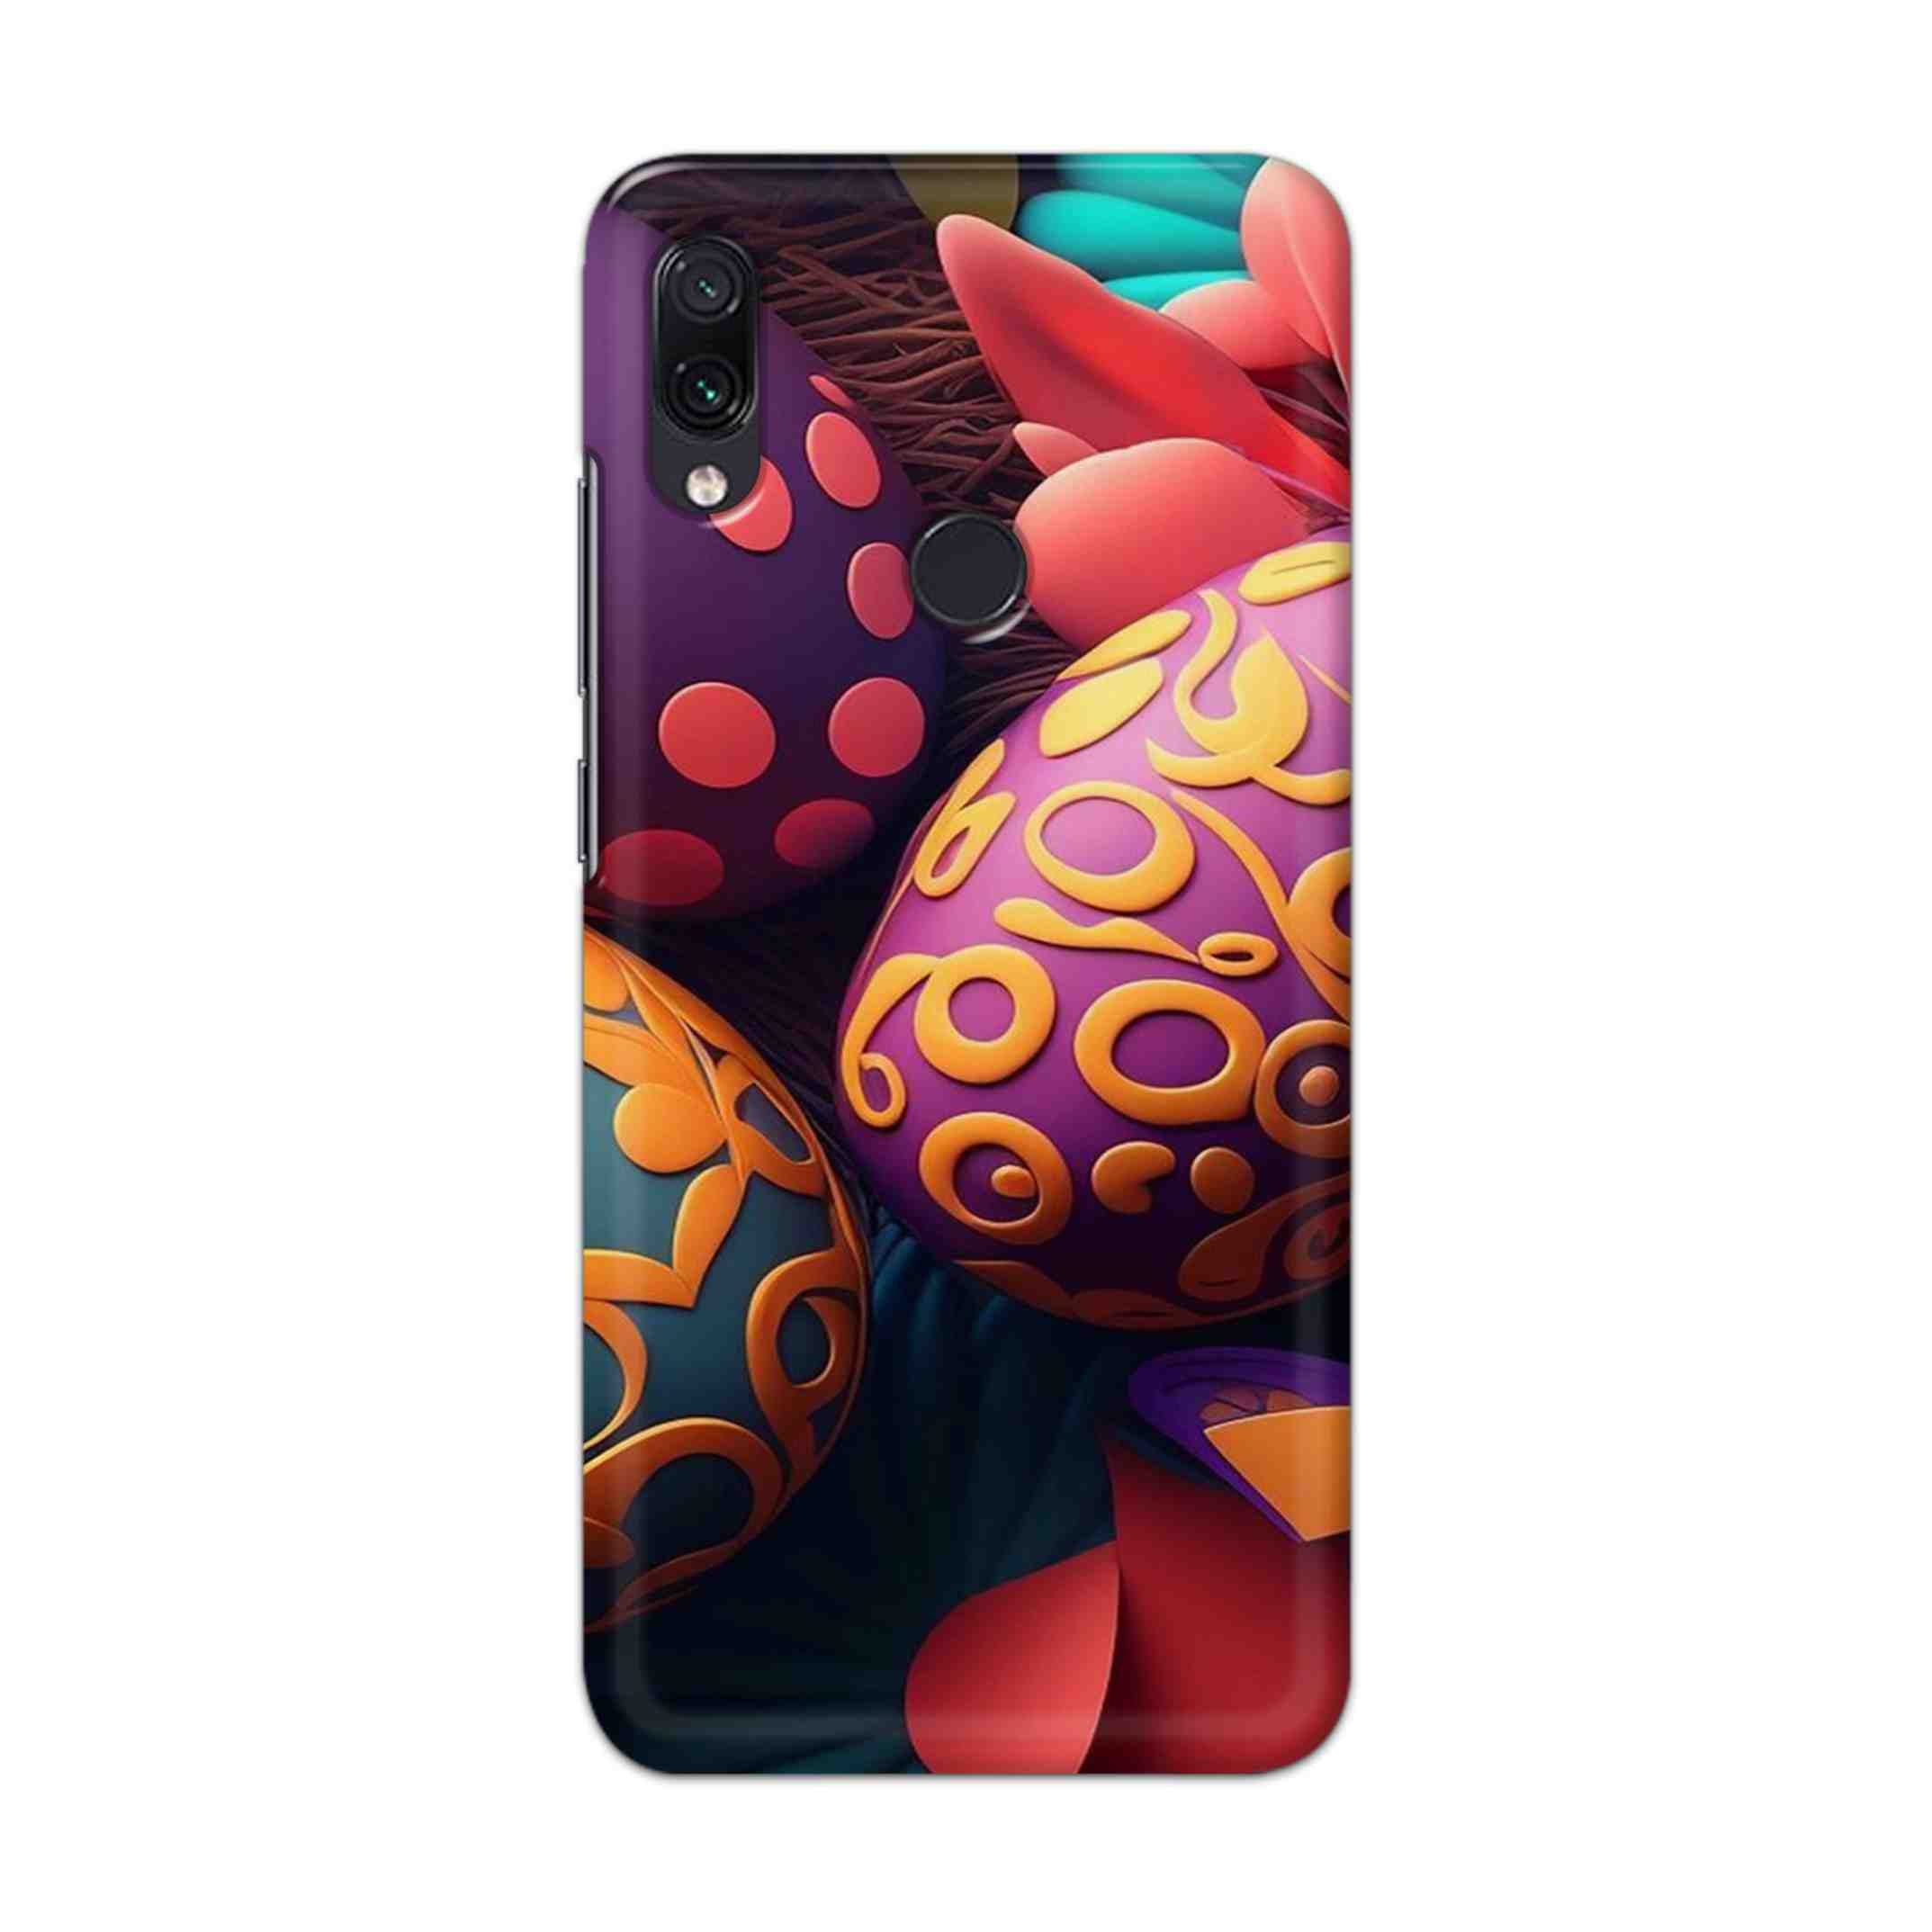 Buy Easter Egg Hard Back Mobile Phone Case Cover For Xiaomi Redmi 7 Online